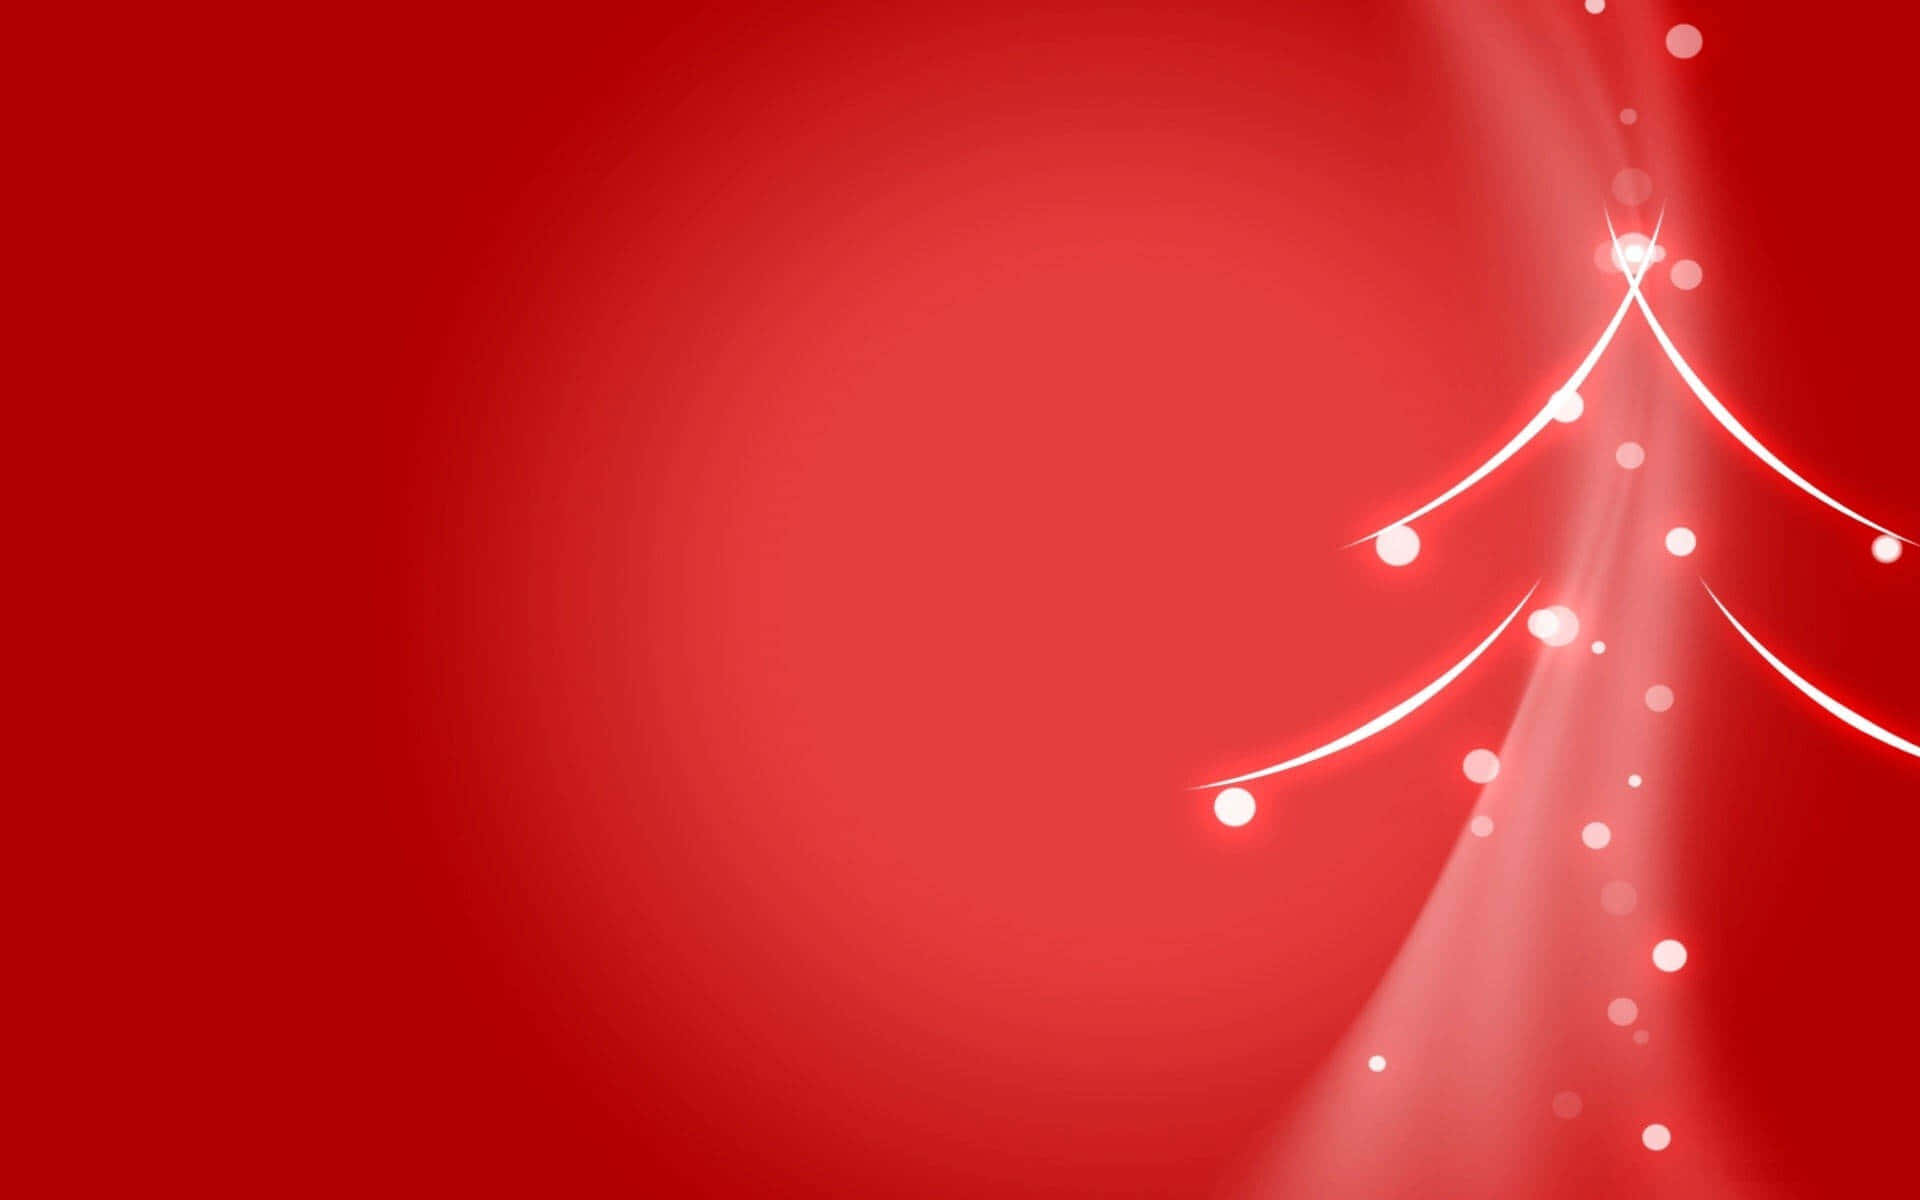 Get into the holiday spirit with a Christmas red background